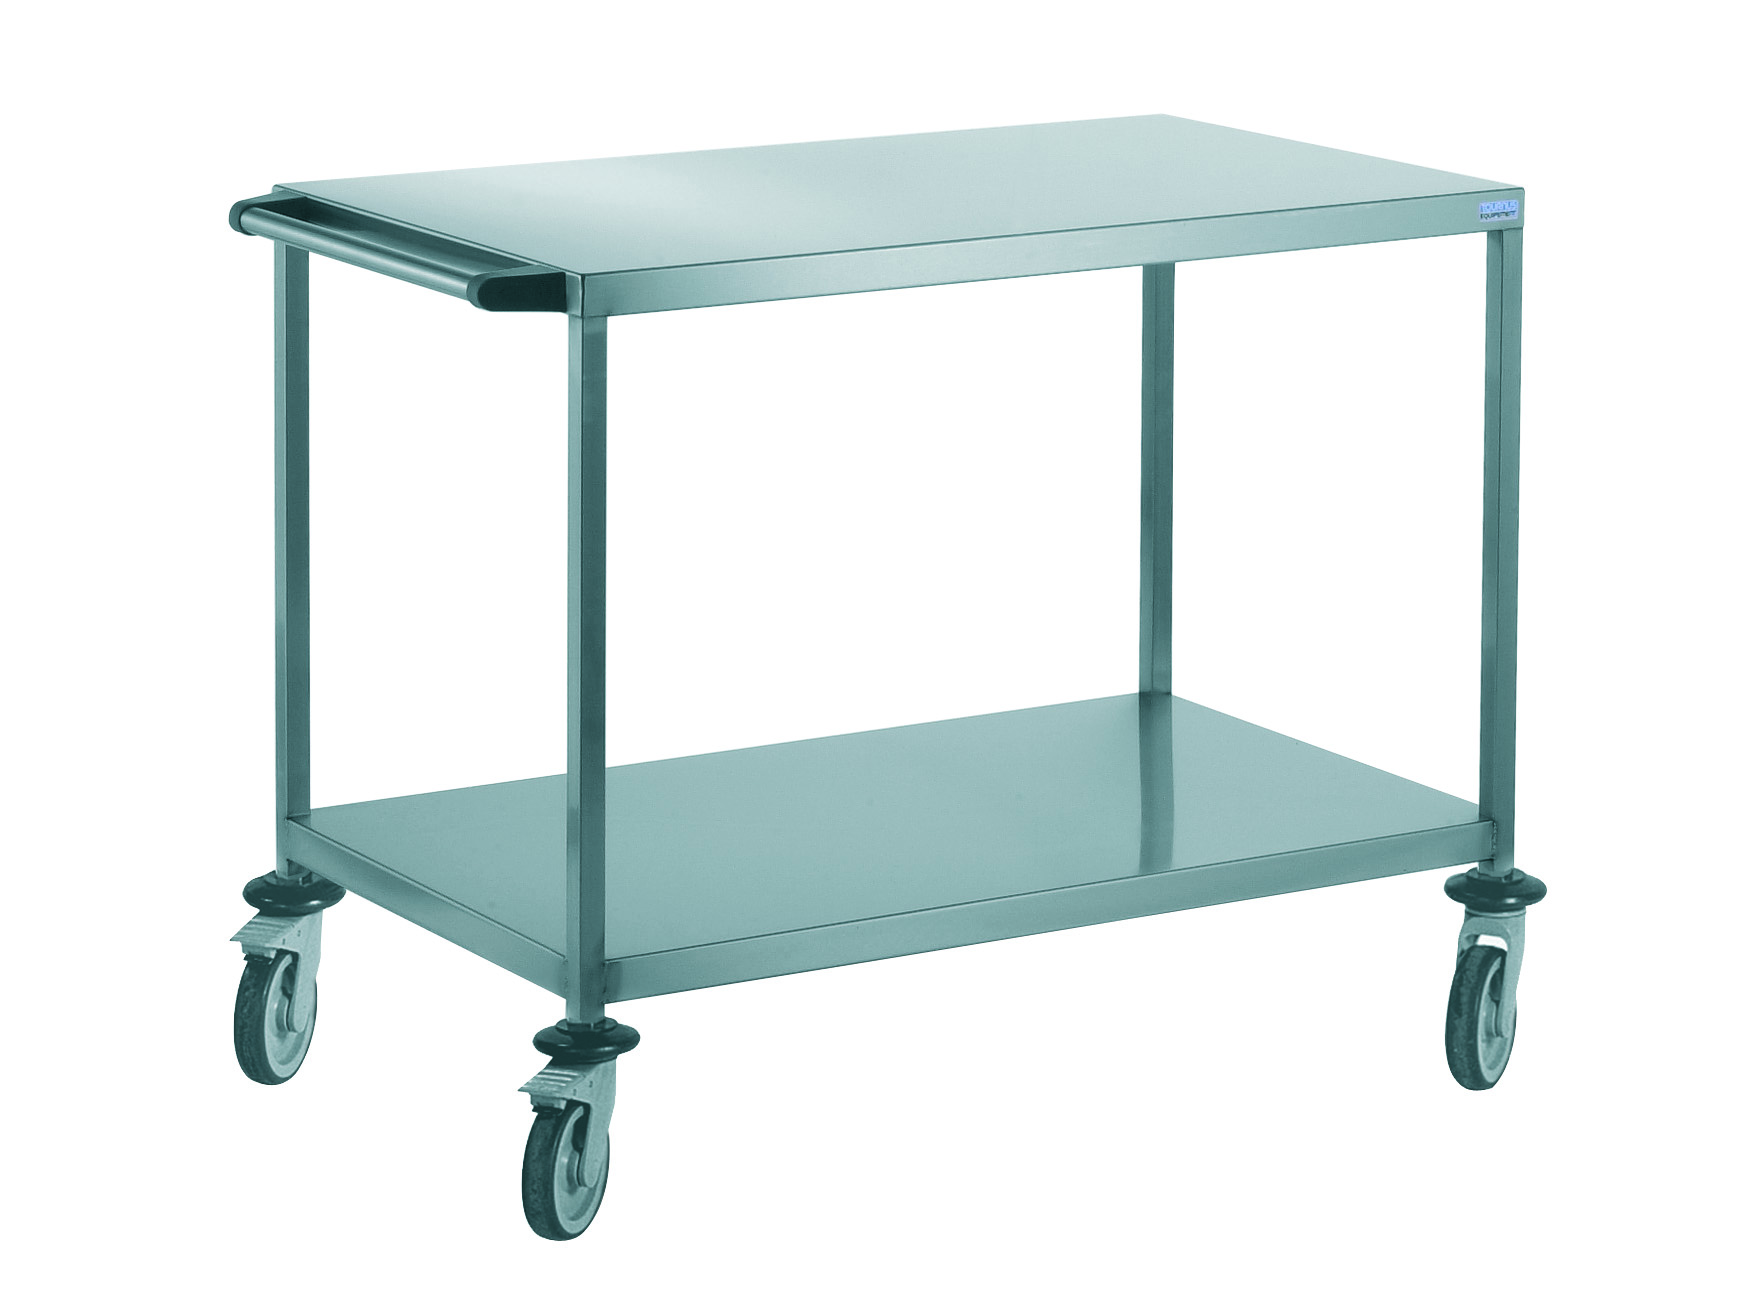 CHARIOT INOX 2 PLATEAUX 800x530 mm - Coop labo